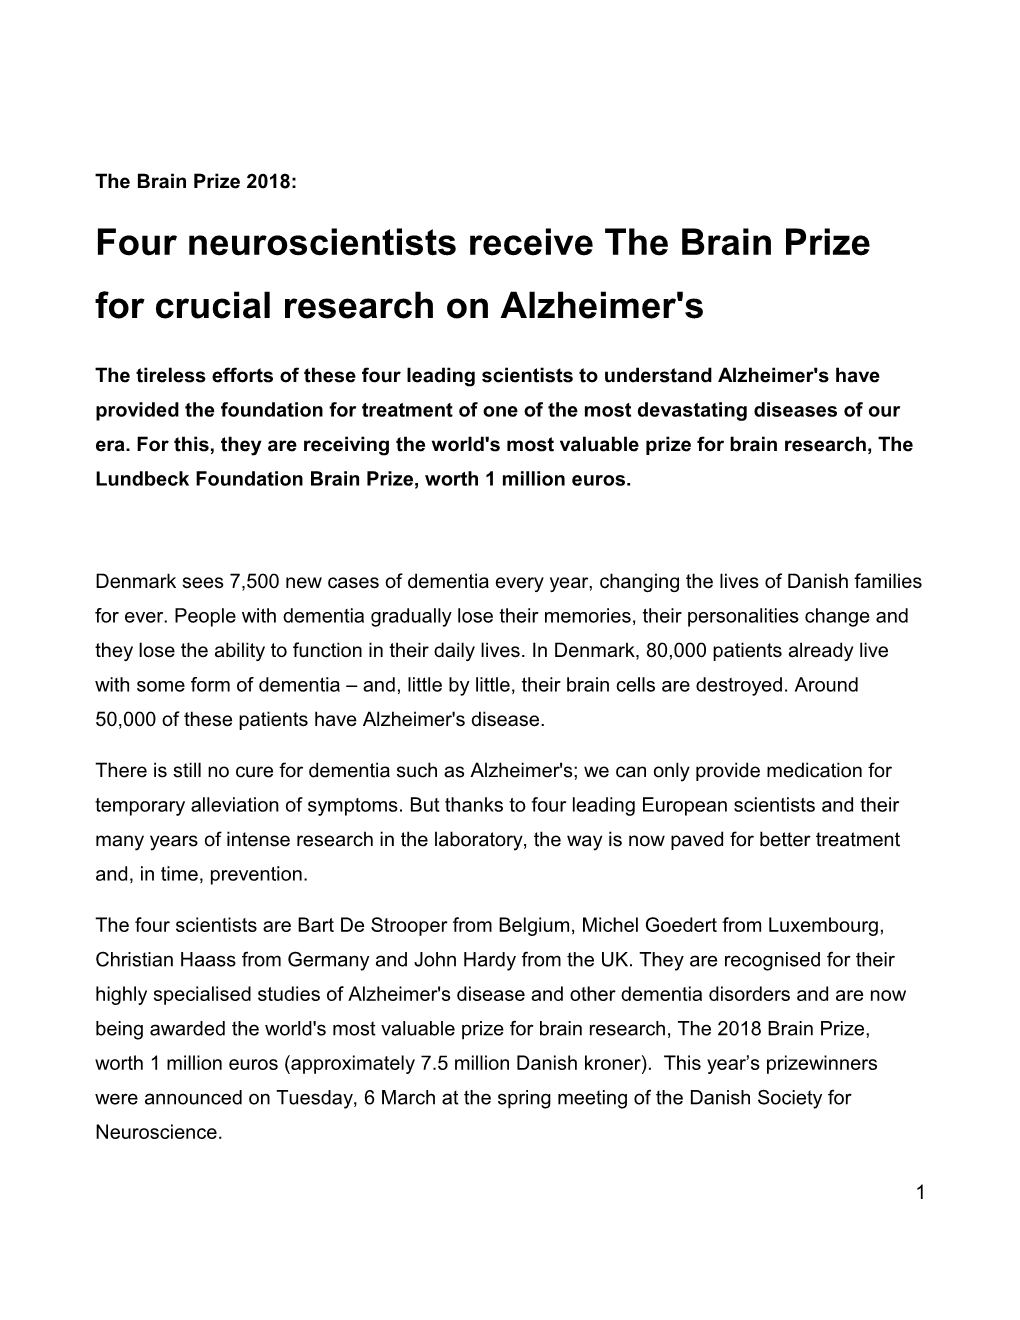 Four Neuroscientists Receive the Brain Prize for Crucial Research on Alzheimer's